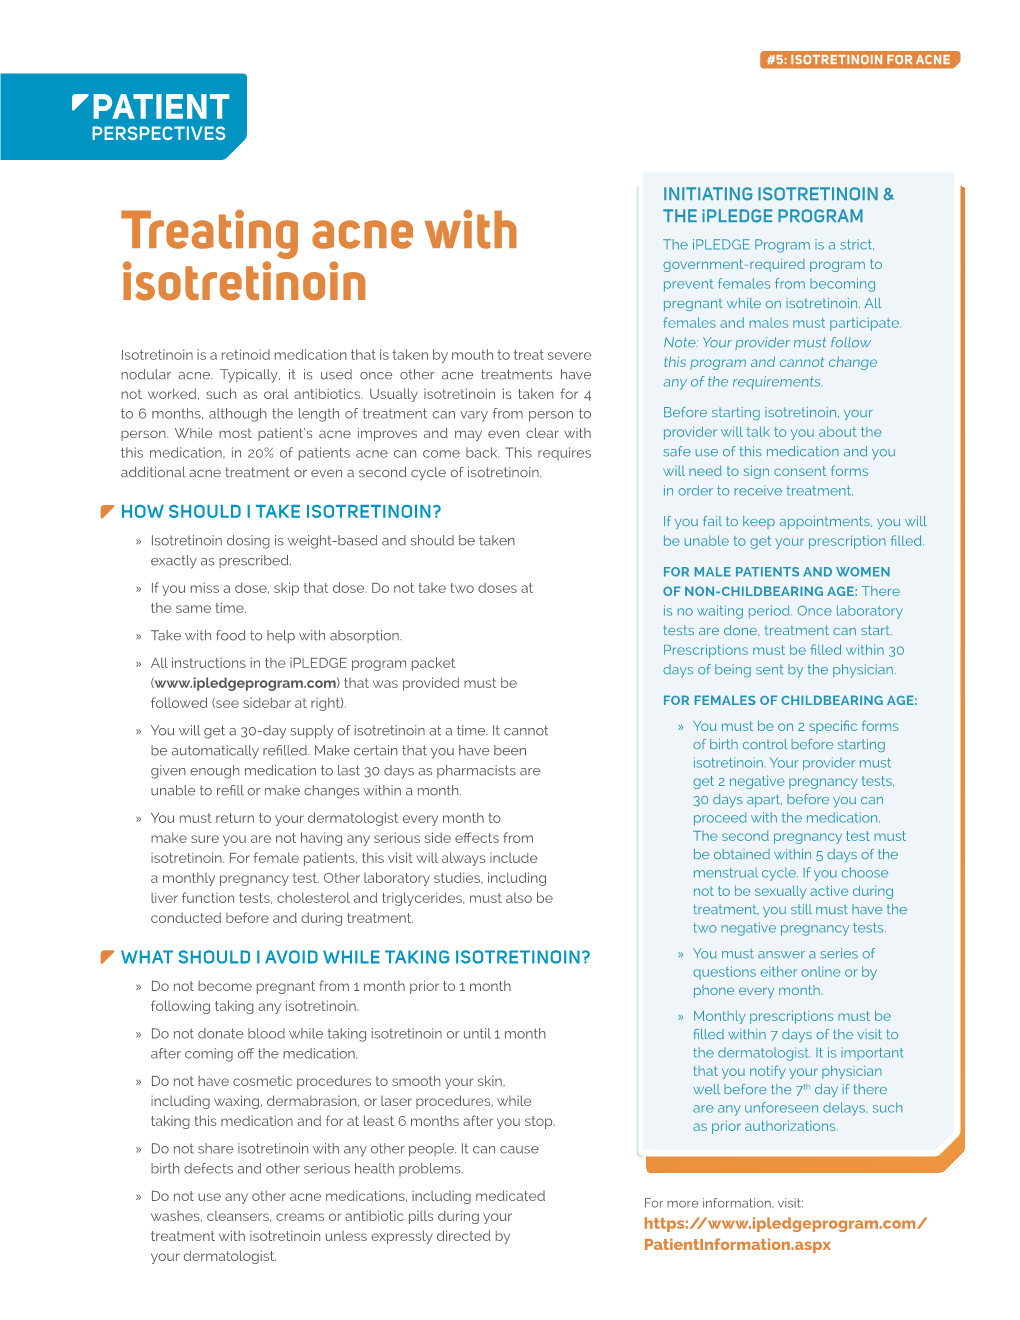 Treating Acne with Isotretinoin